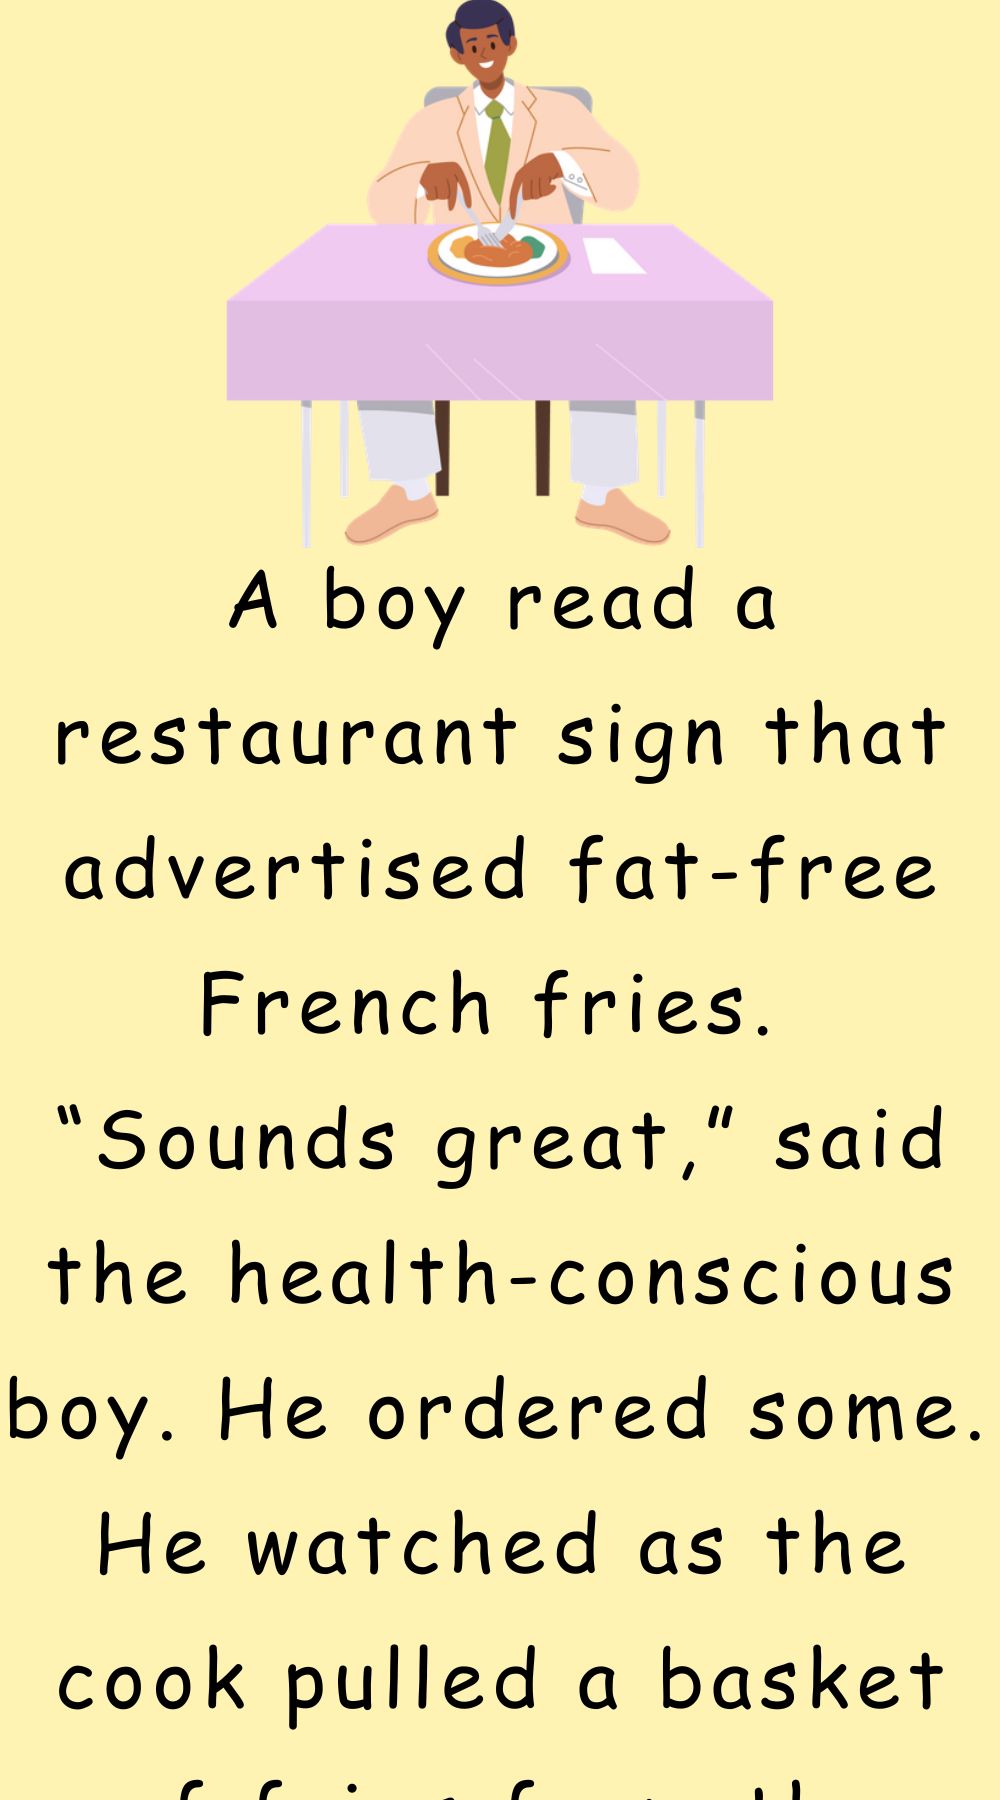 A boy read a restaurant sign that advertised